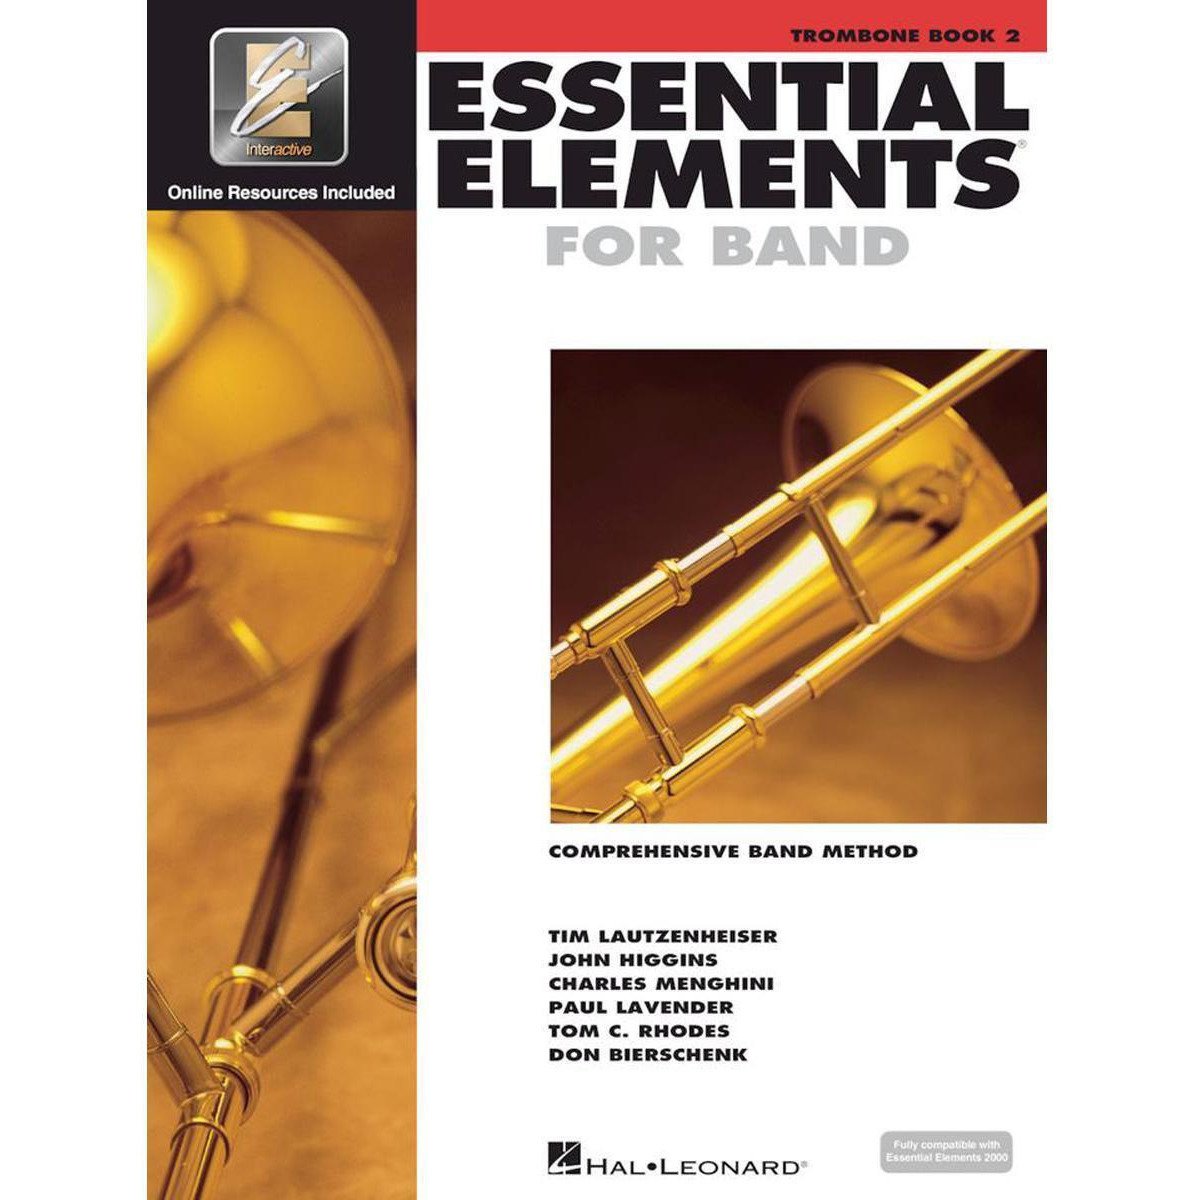 Essential Elements for Band Book 2-Trombone-Andy's Music